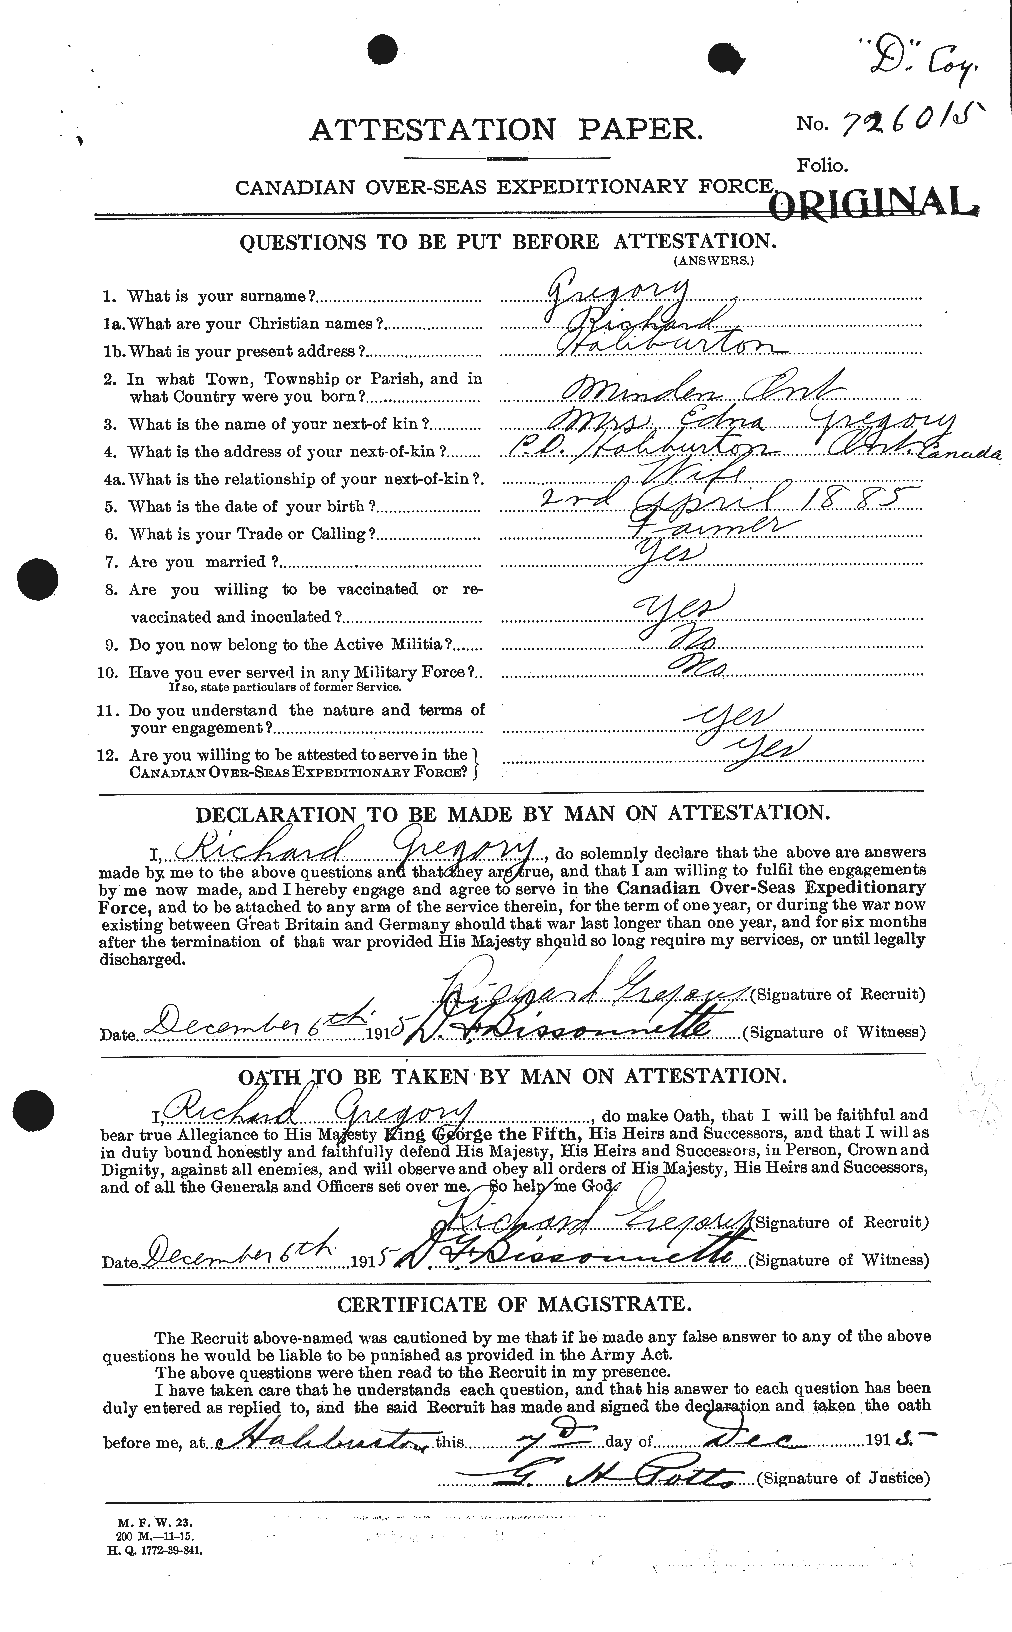 Personnel Records of the First World War - CEF 363019a